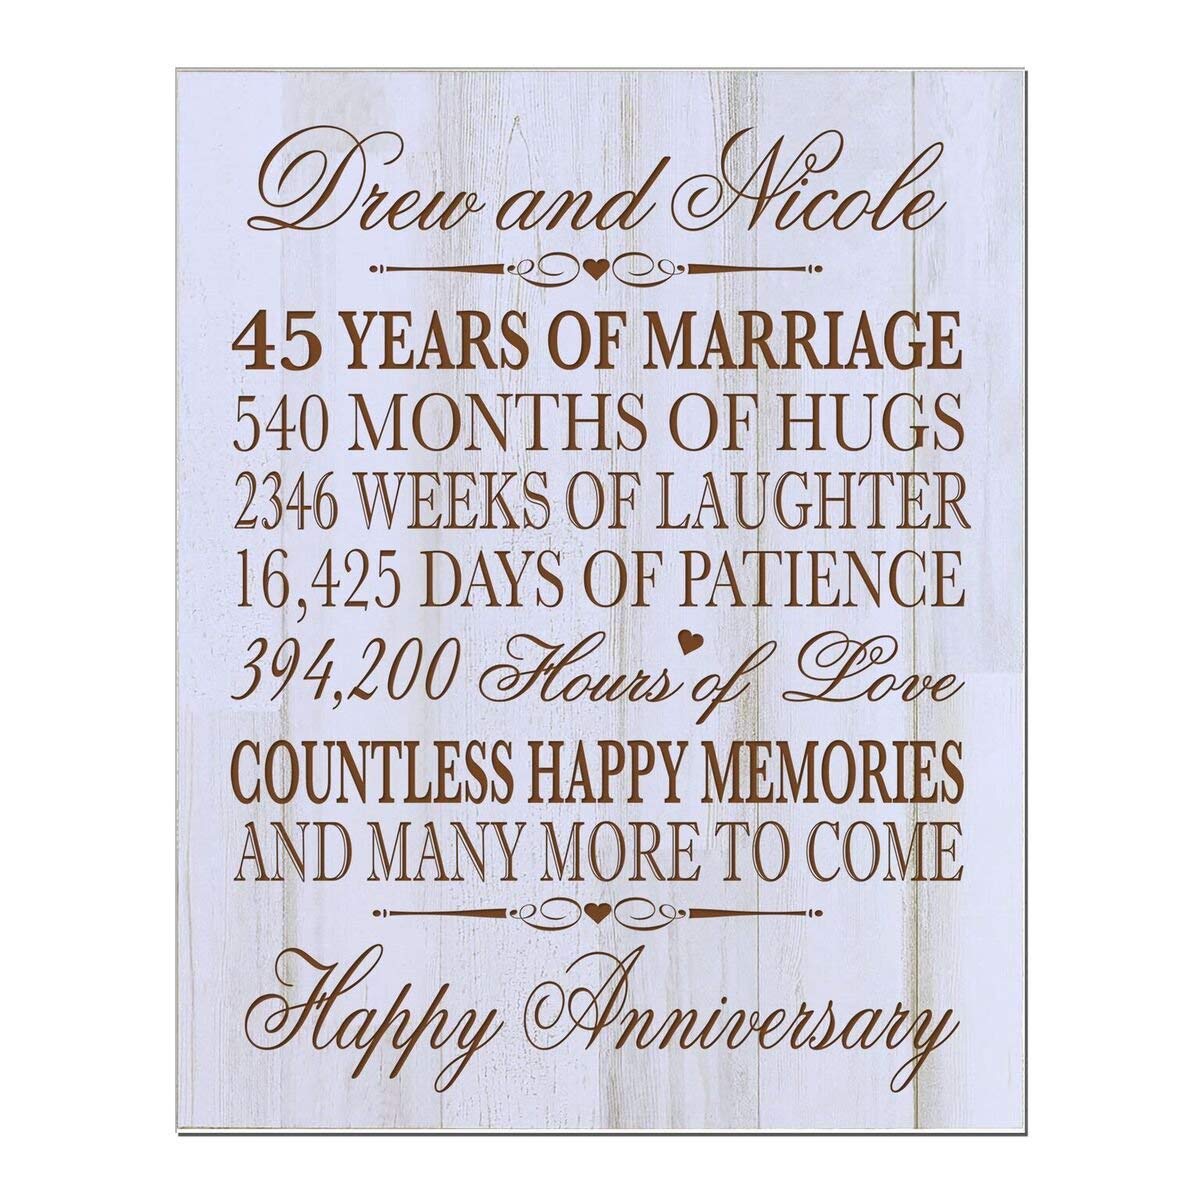 5th Wedding Anniversary Wall Plaque Gifts for Couple, 5th Anniversary Gifts  for Her,5th Wedding Anniversary Gifts for Him 12 WX 15 H Wall Plaque By